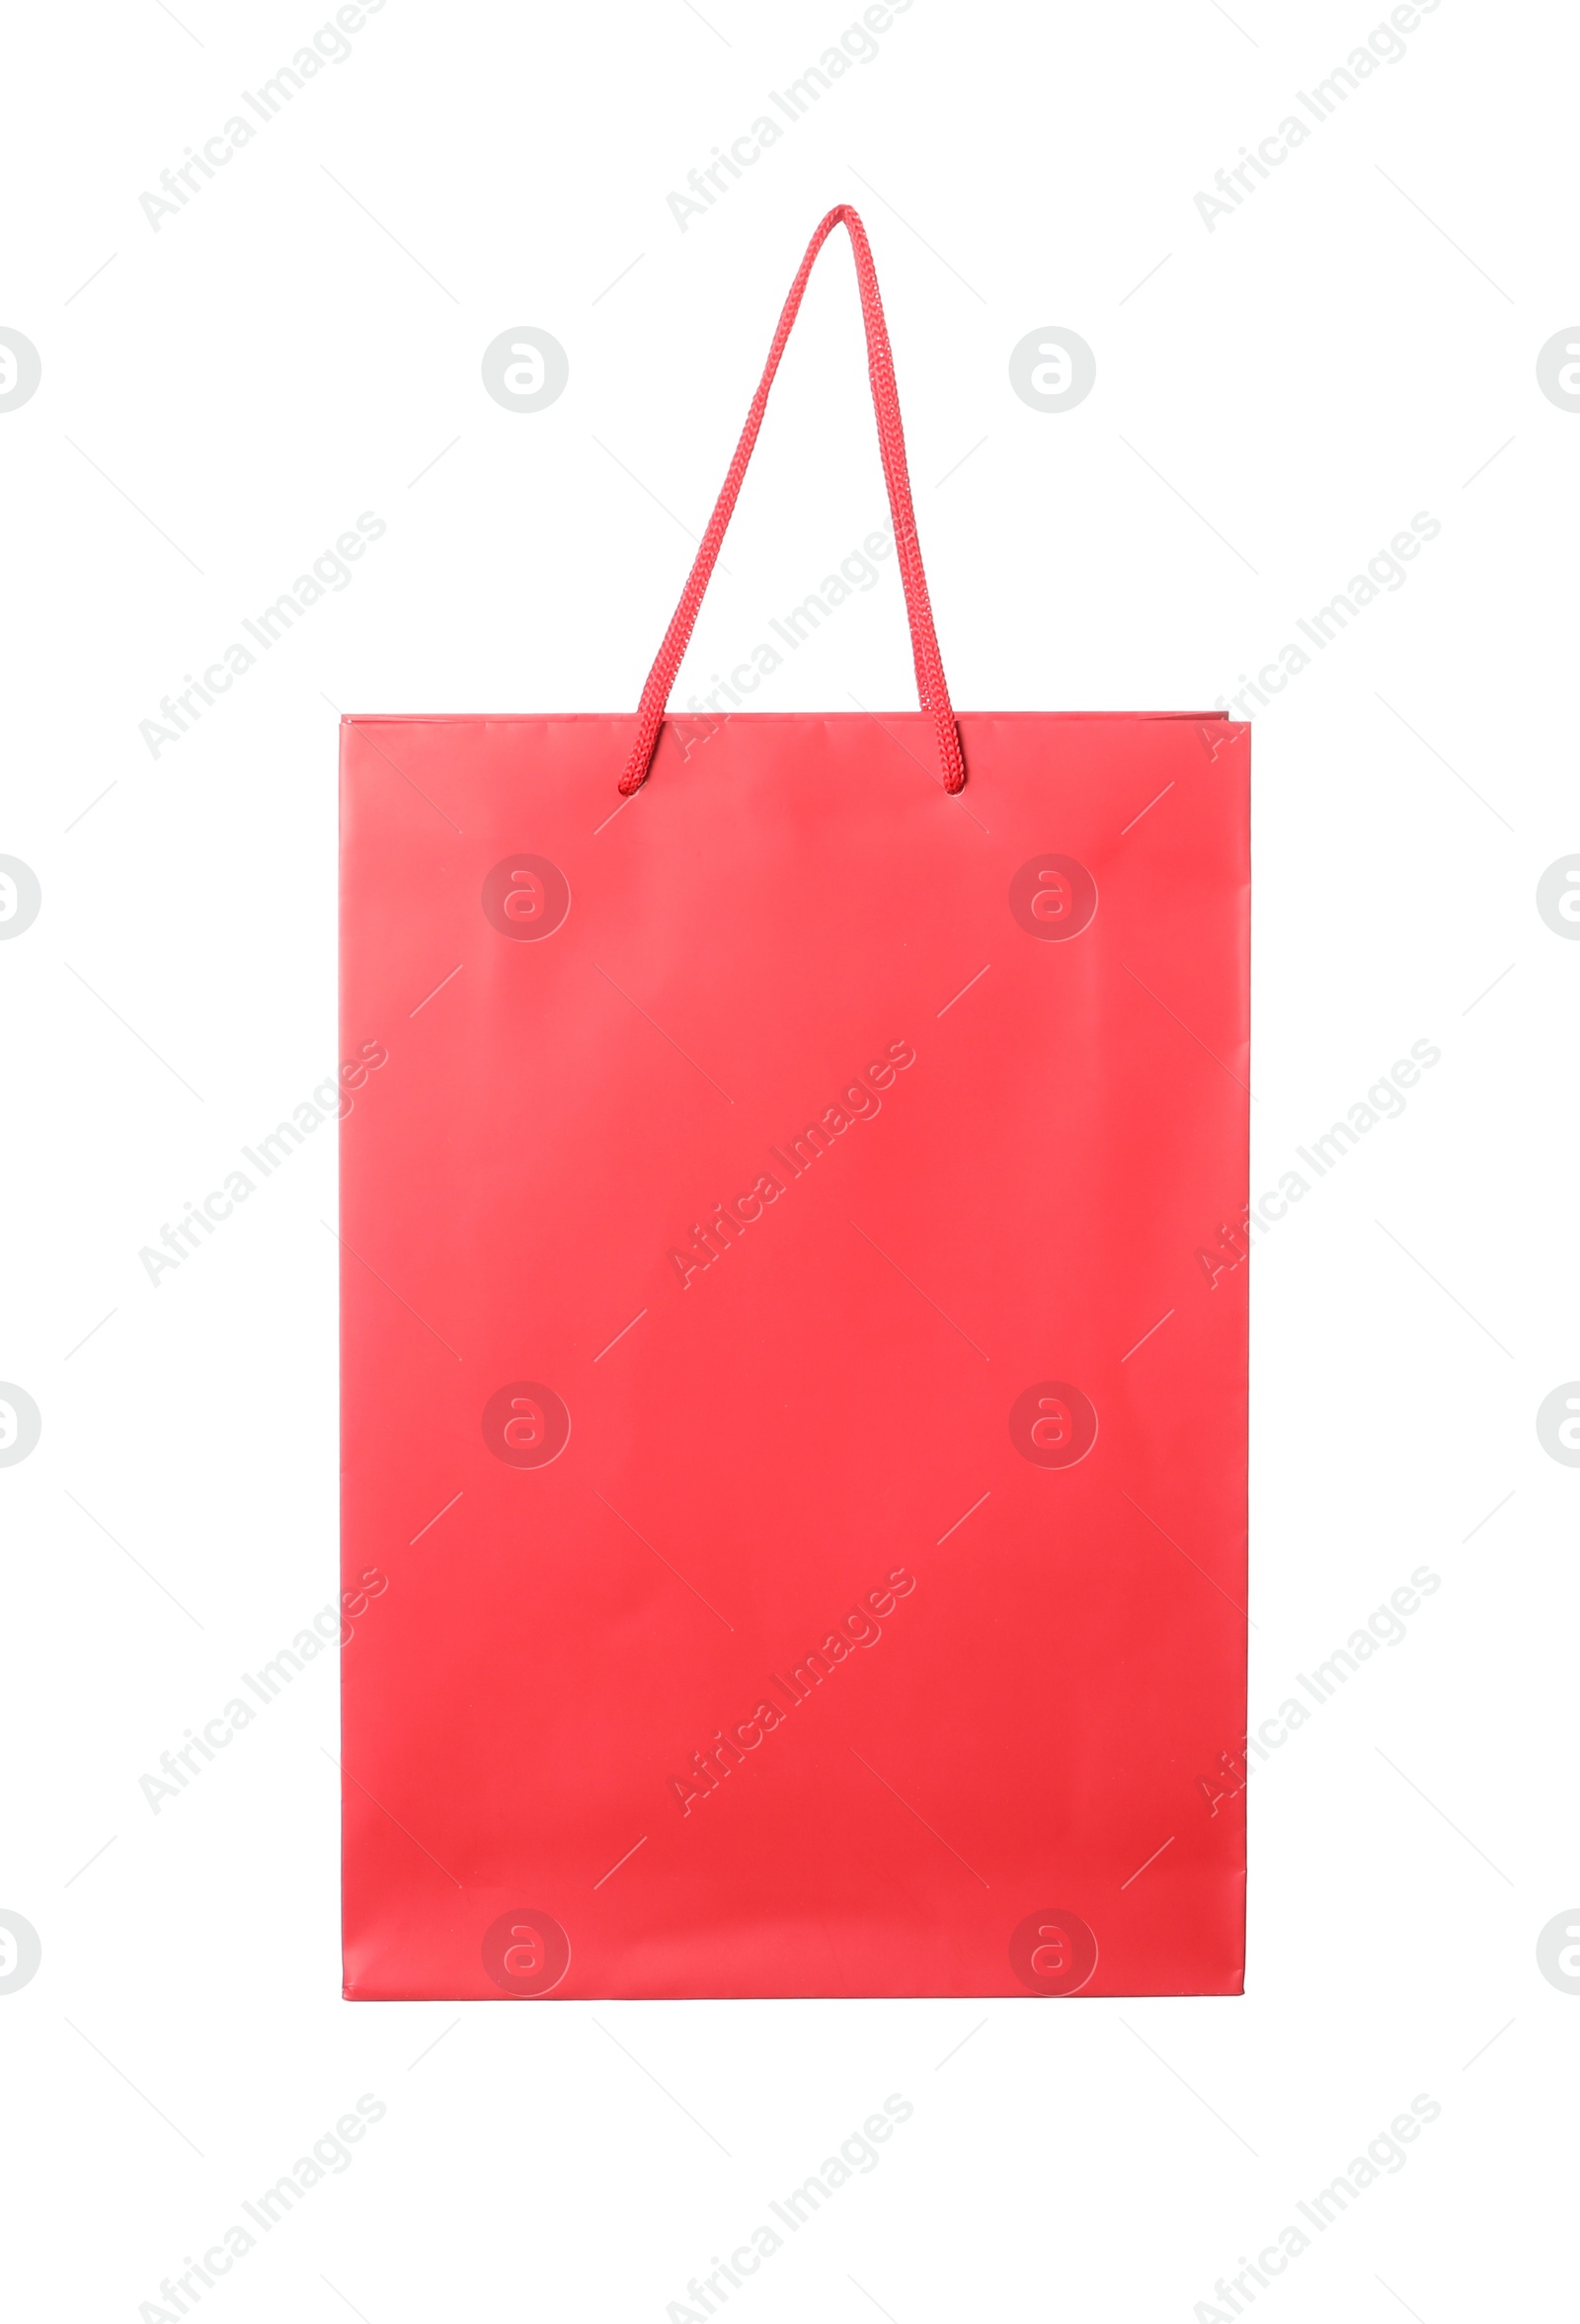 Photo of One red shopping bag isolated on white